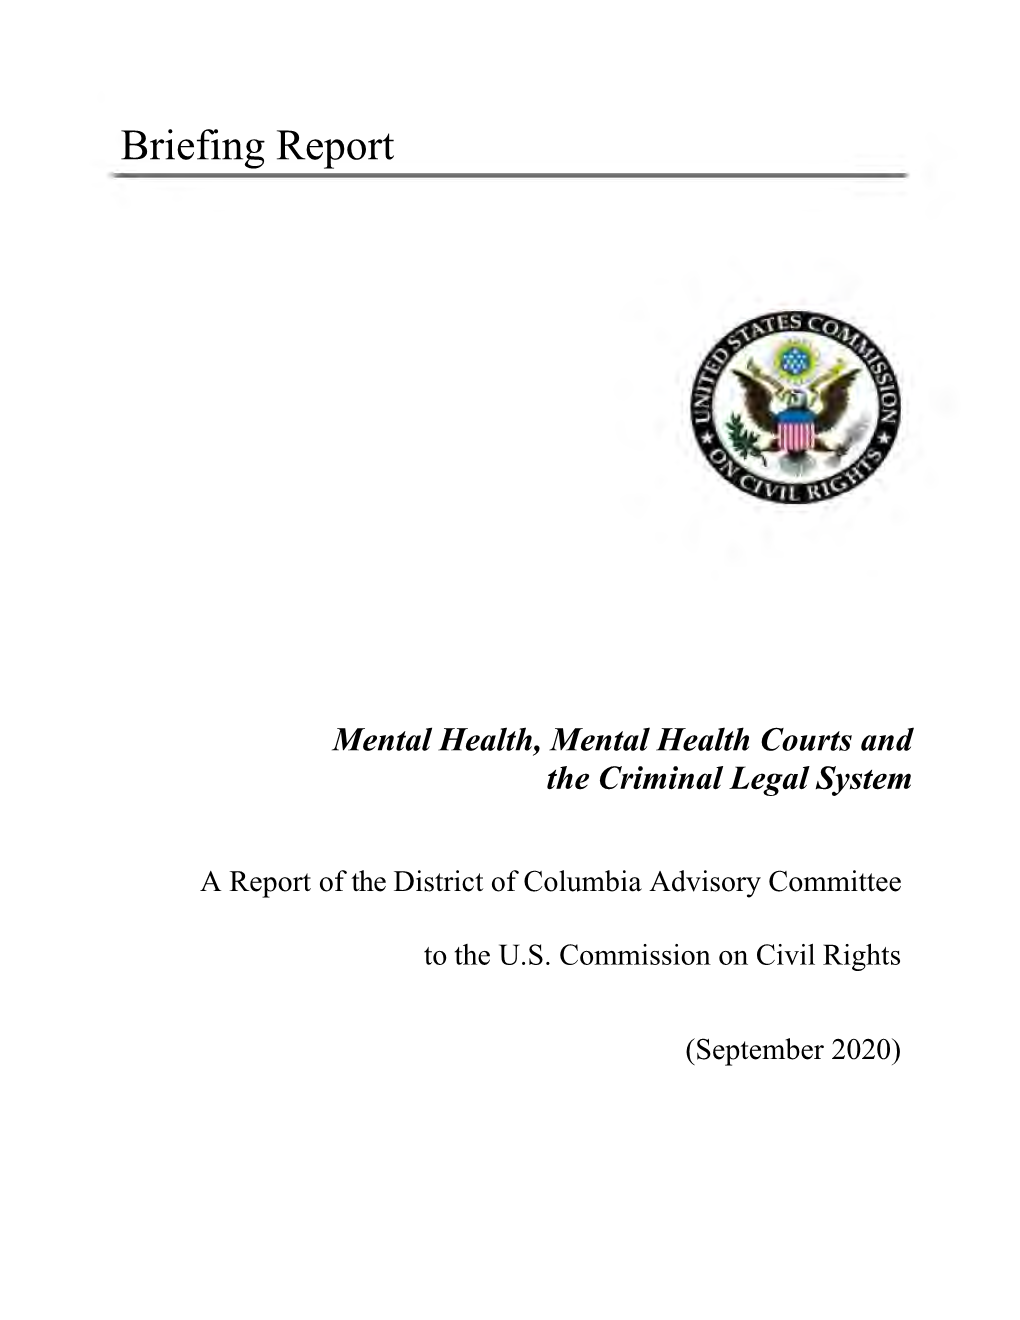 Mental Health, Mental Health Courts and the Criminal Legal System